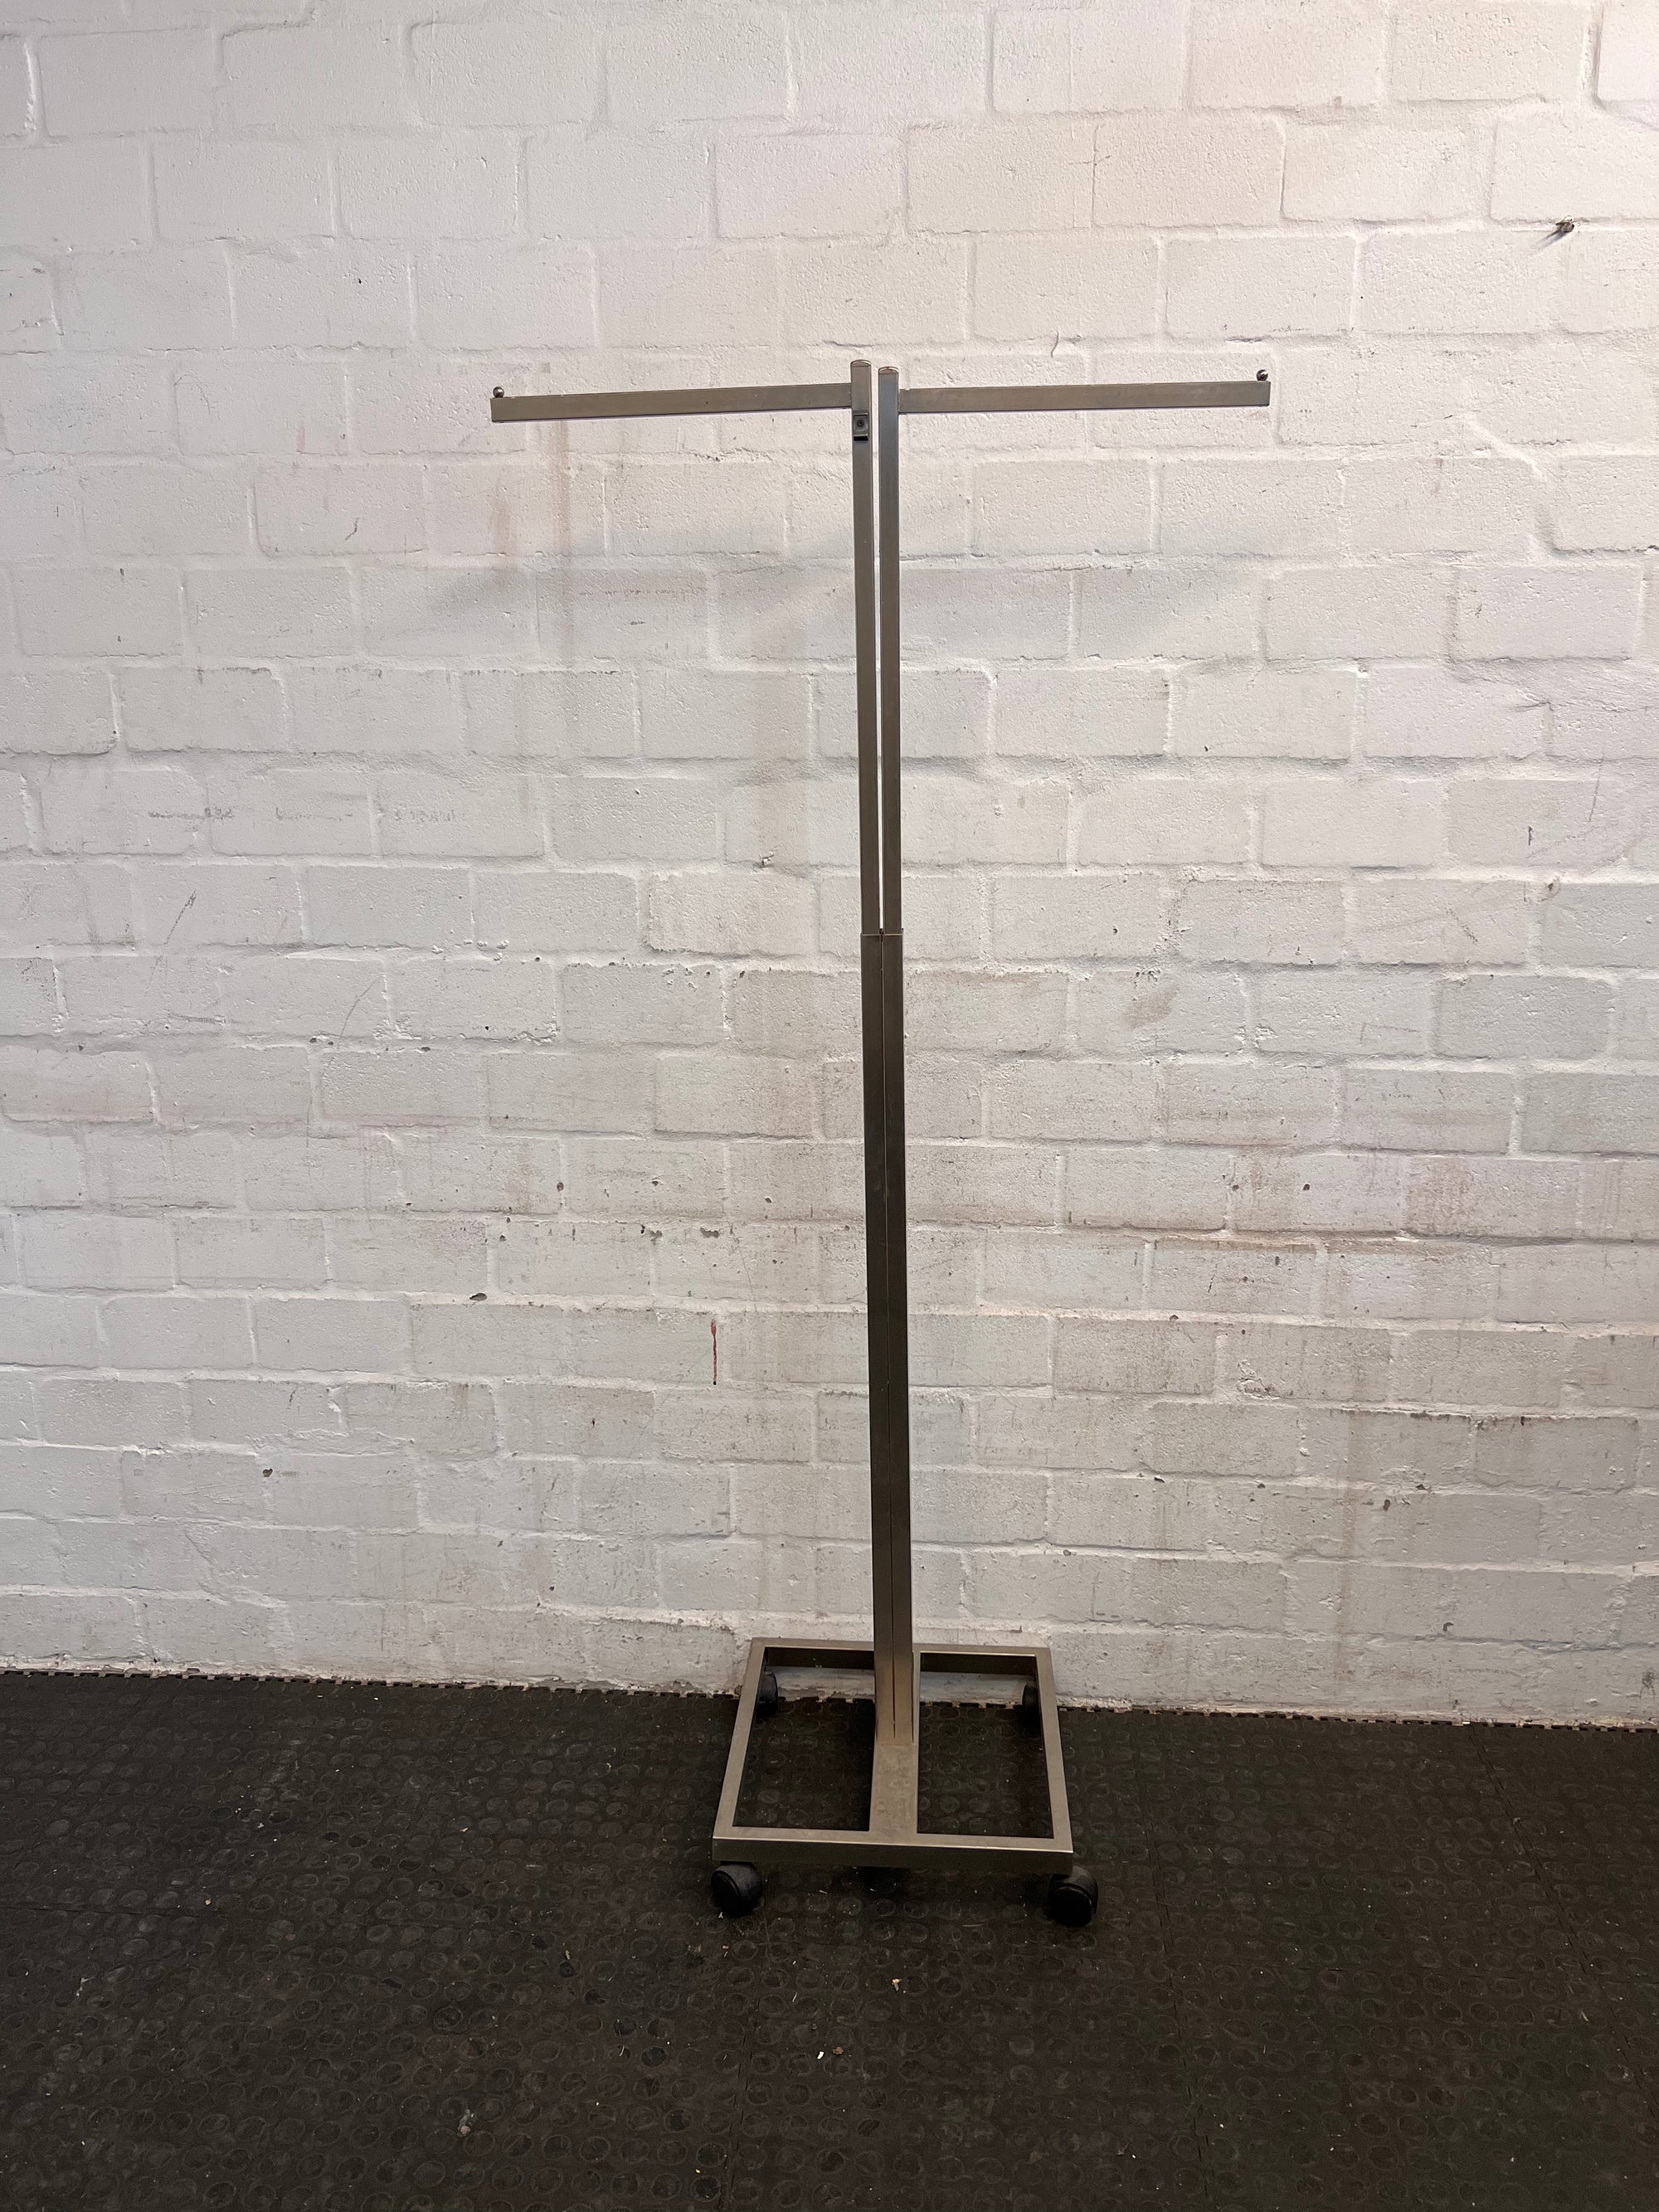 2 Sided Stainless Steel Clothing Rail with Adjustable Height on Wheels - Top Clips